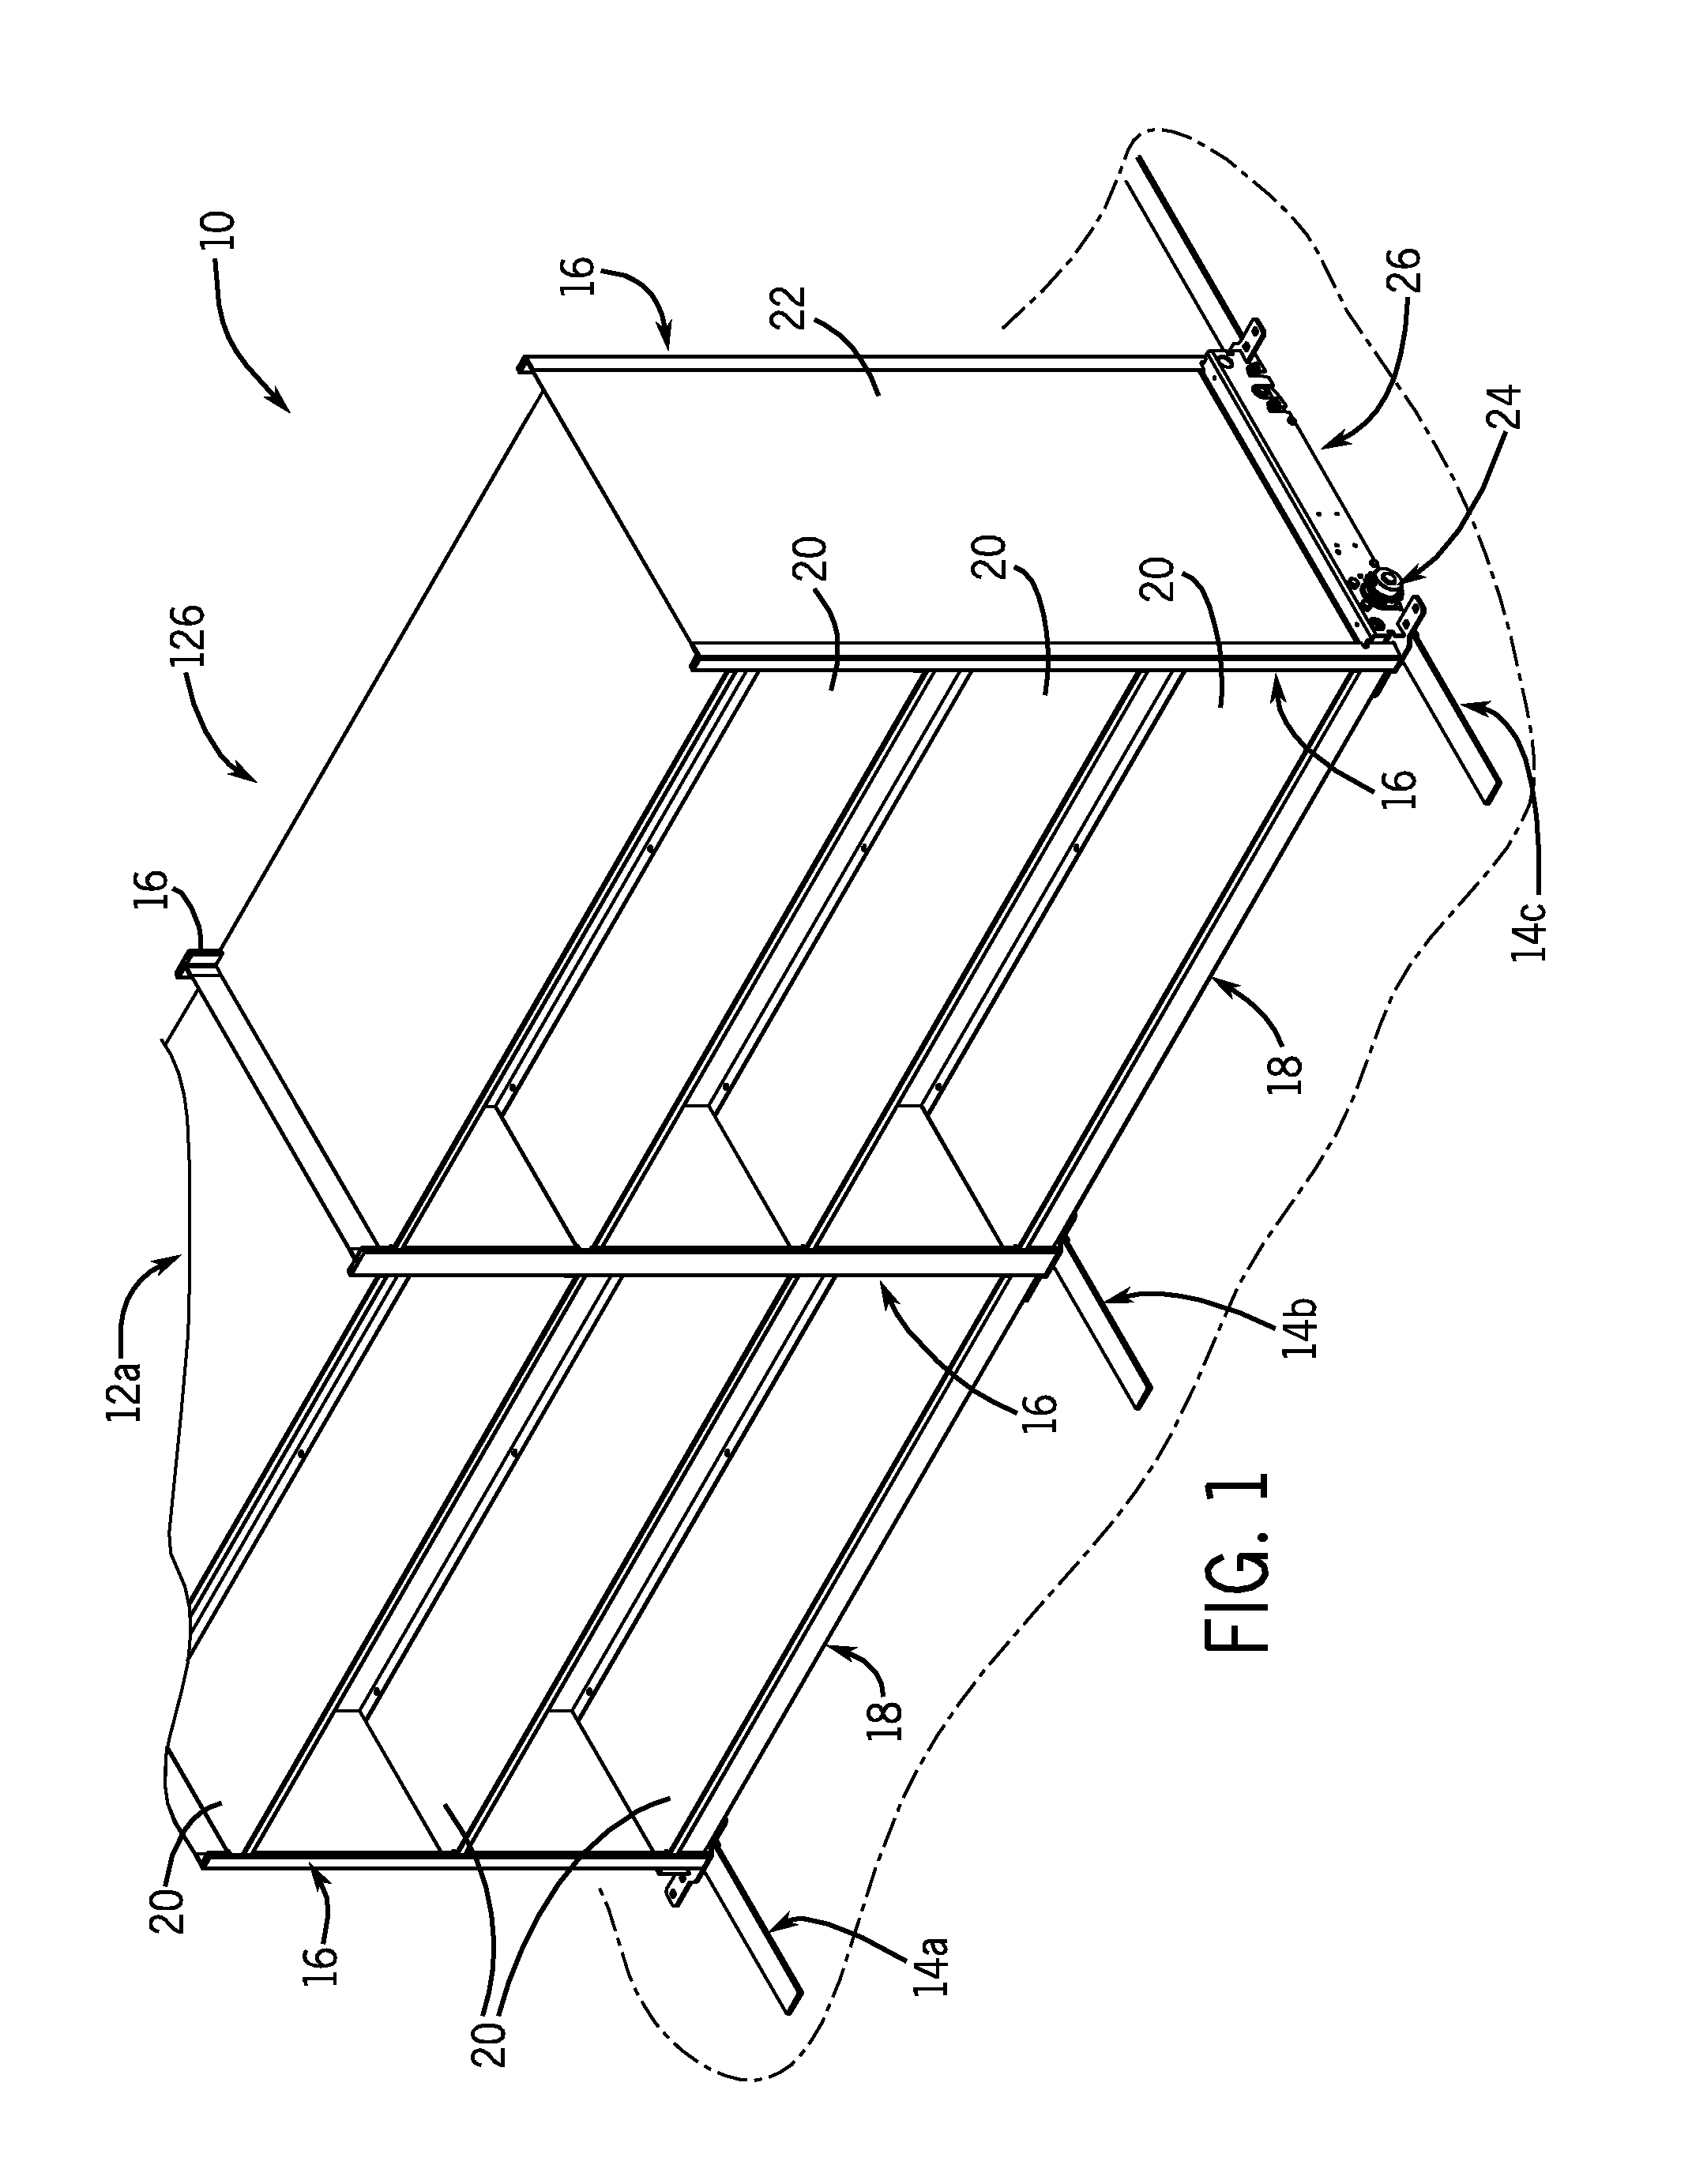 Carriageless mobilized storage unit for use in a mobile storage system